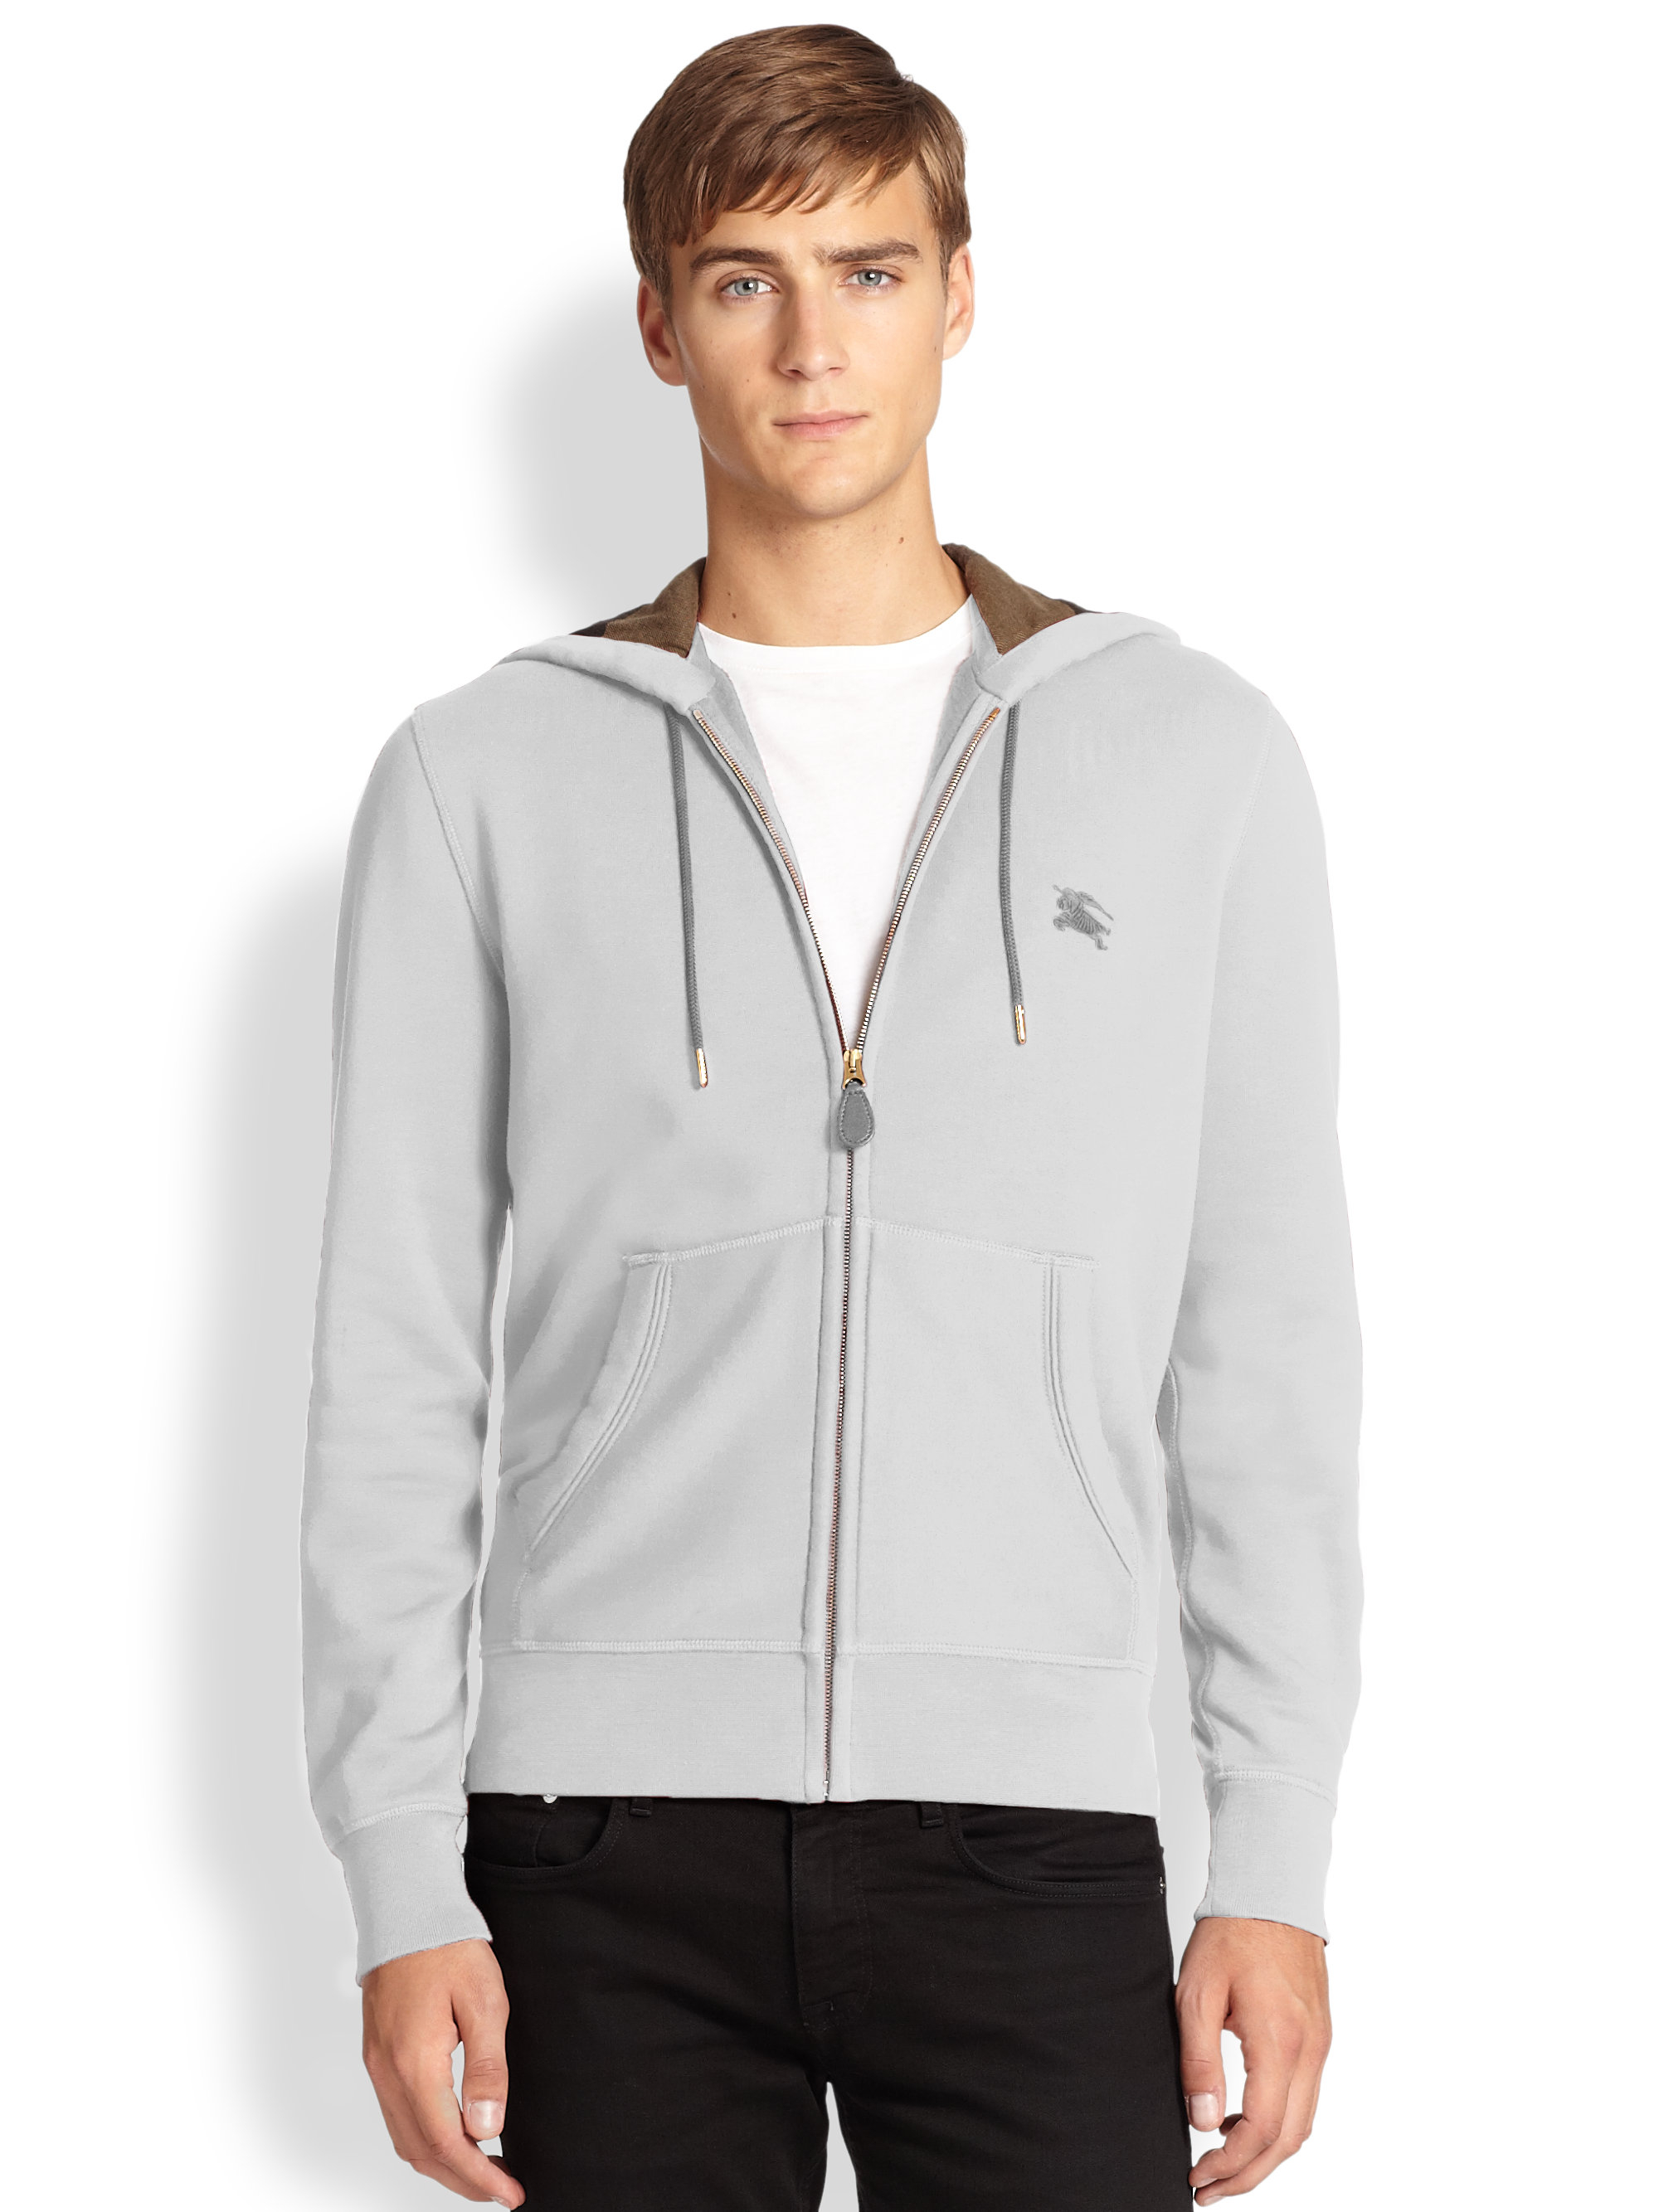 Grey Burberry Hoodie | The Art of Mike 